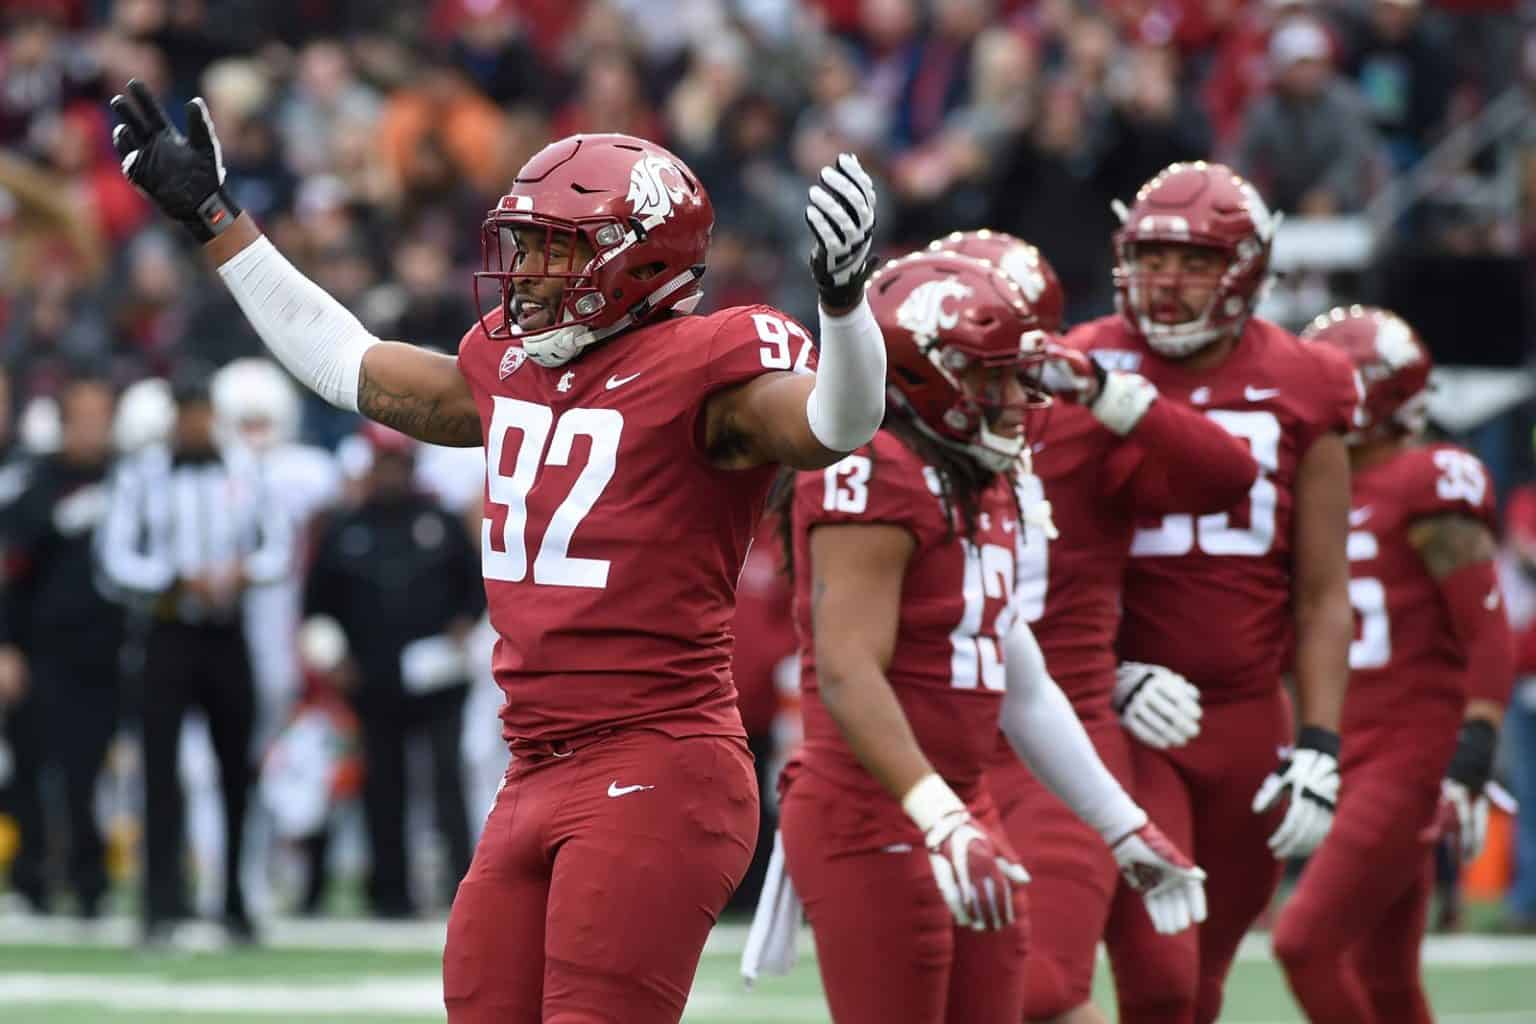 2020 Washington State Cougars football schedule released